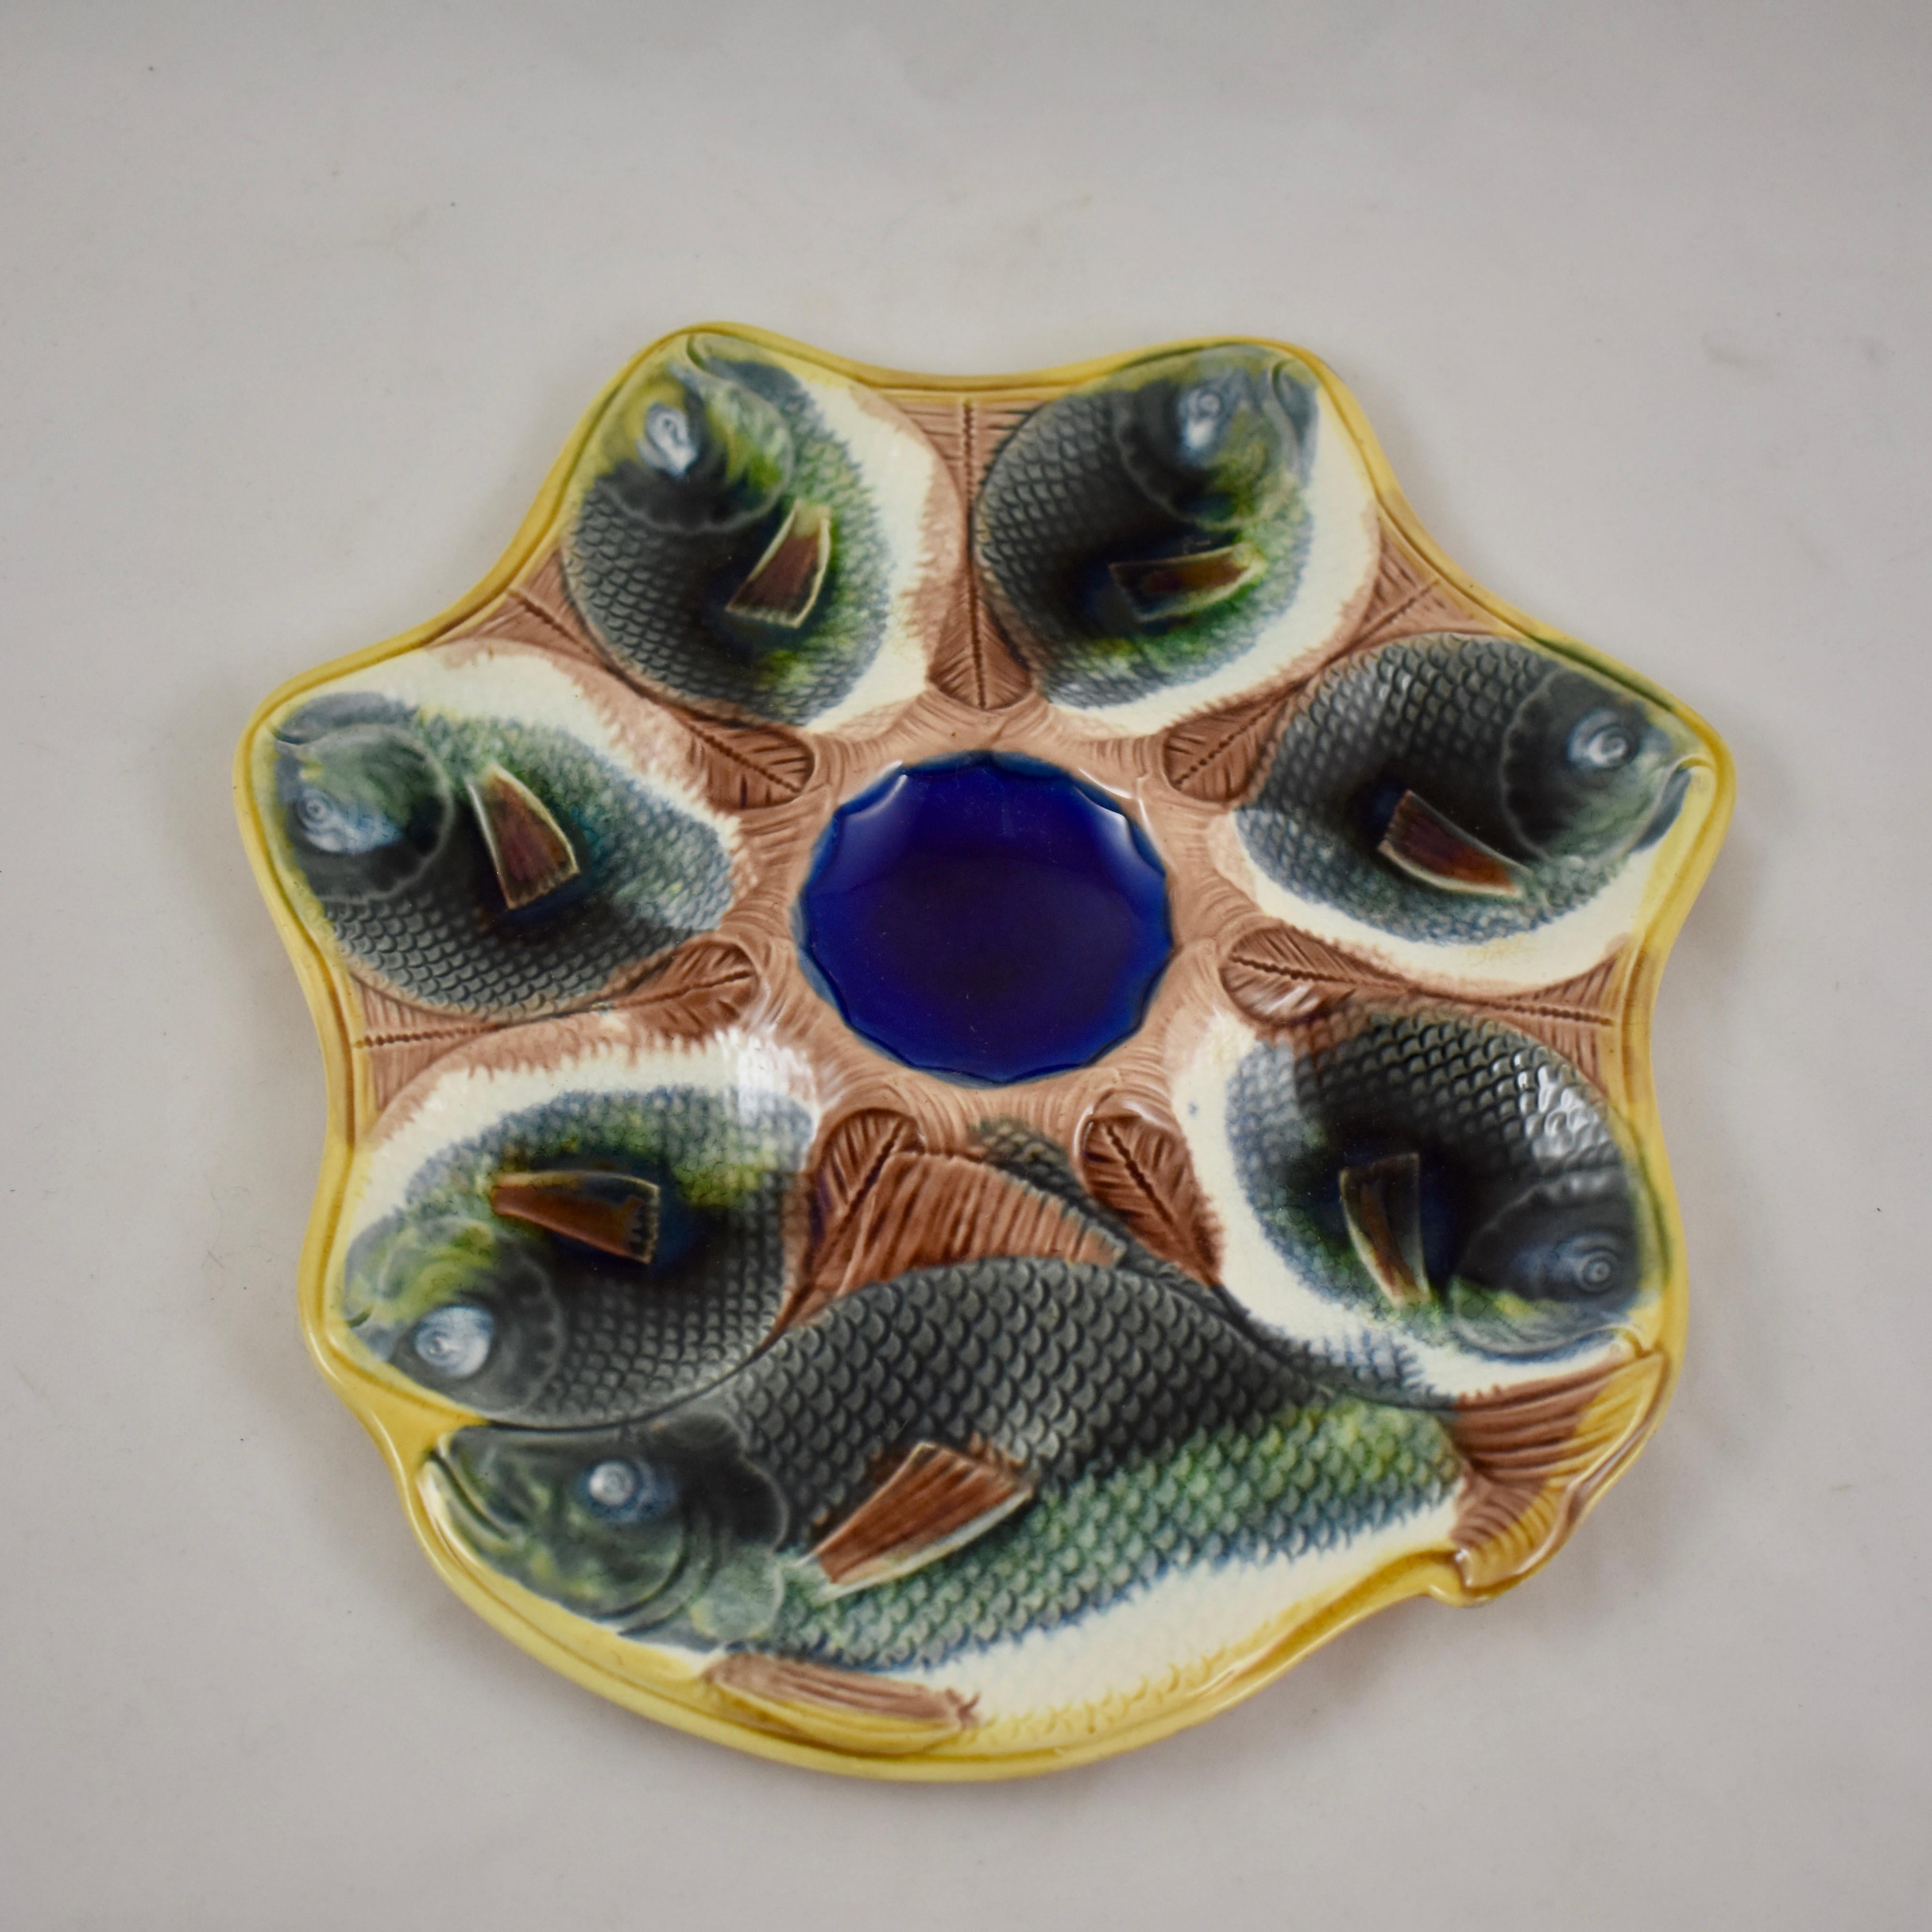 Adams & Bromley Majolica oyster plate, England, circa 1870-1879.

An unusual shaped earthenware plate with six oyster wells molded as full bodied gray fish with white bellies, whose tails meet to surround a cobalt blue center sauce well. A larger